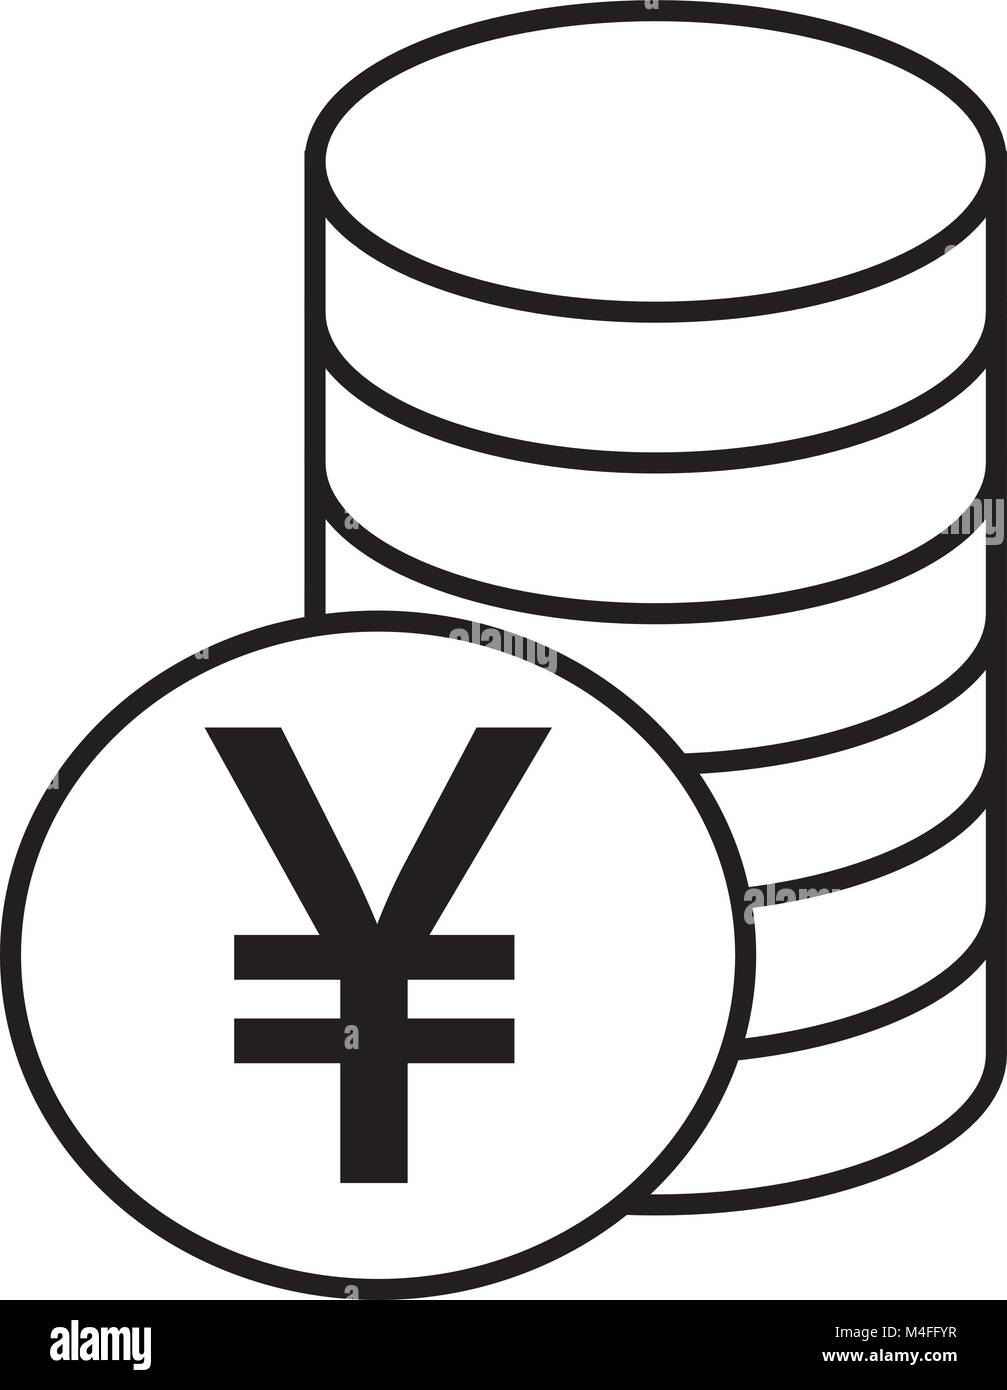 Yen, Yuan or Renminbi currency icon or logo vector over a pile of coins stack. Symbol for Japanese or Chinese bank, banking or Japan and China finance Stock Vector